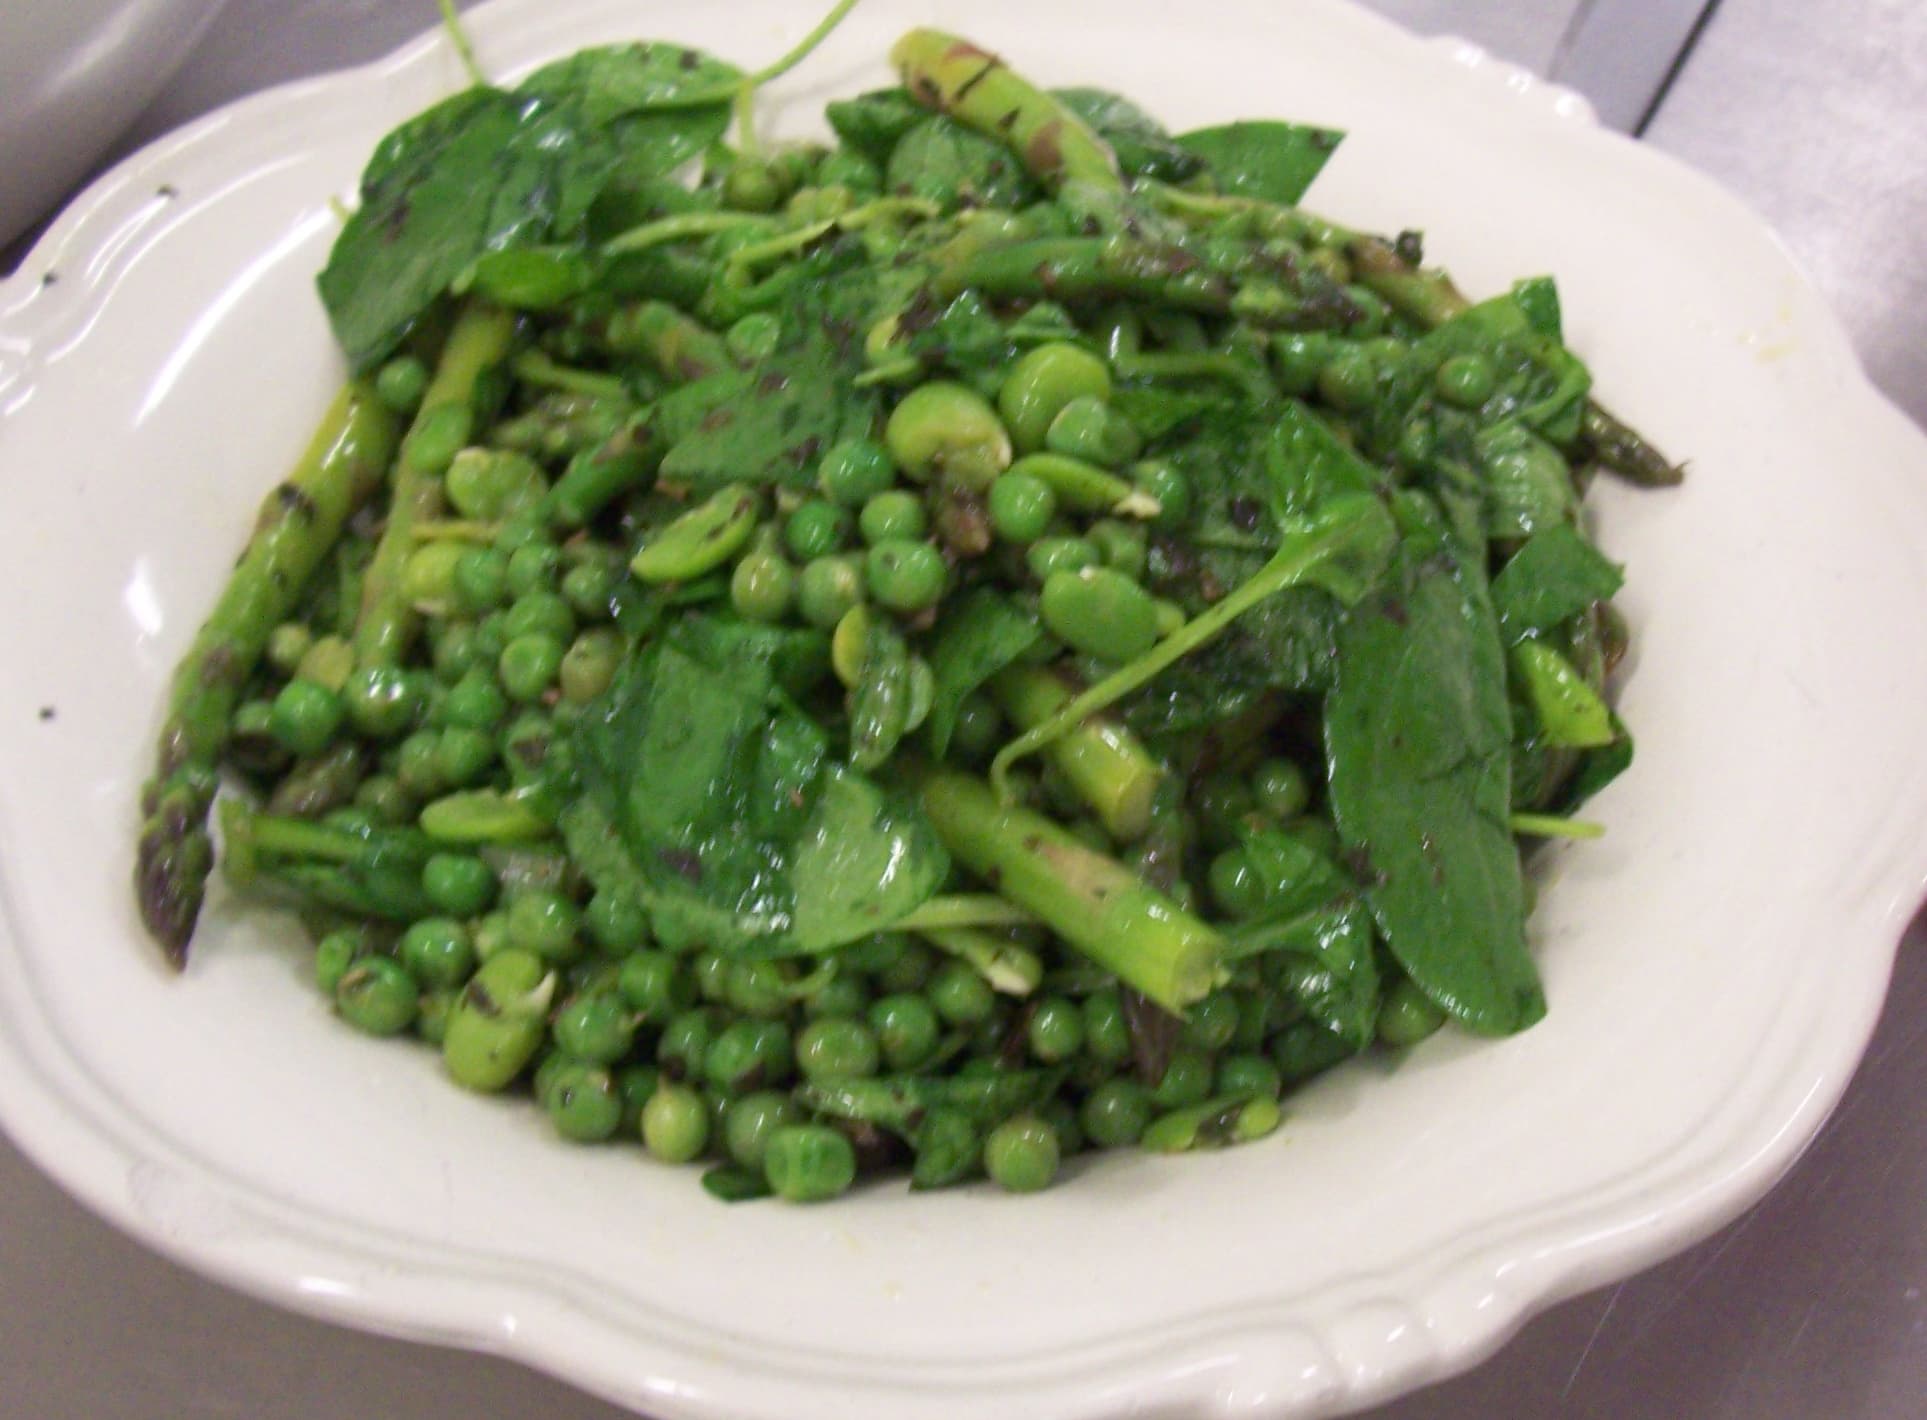 Peas and green vegetables
